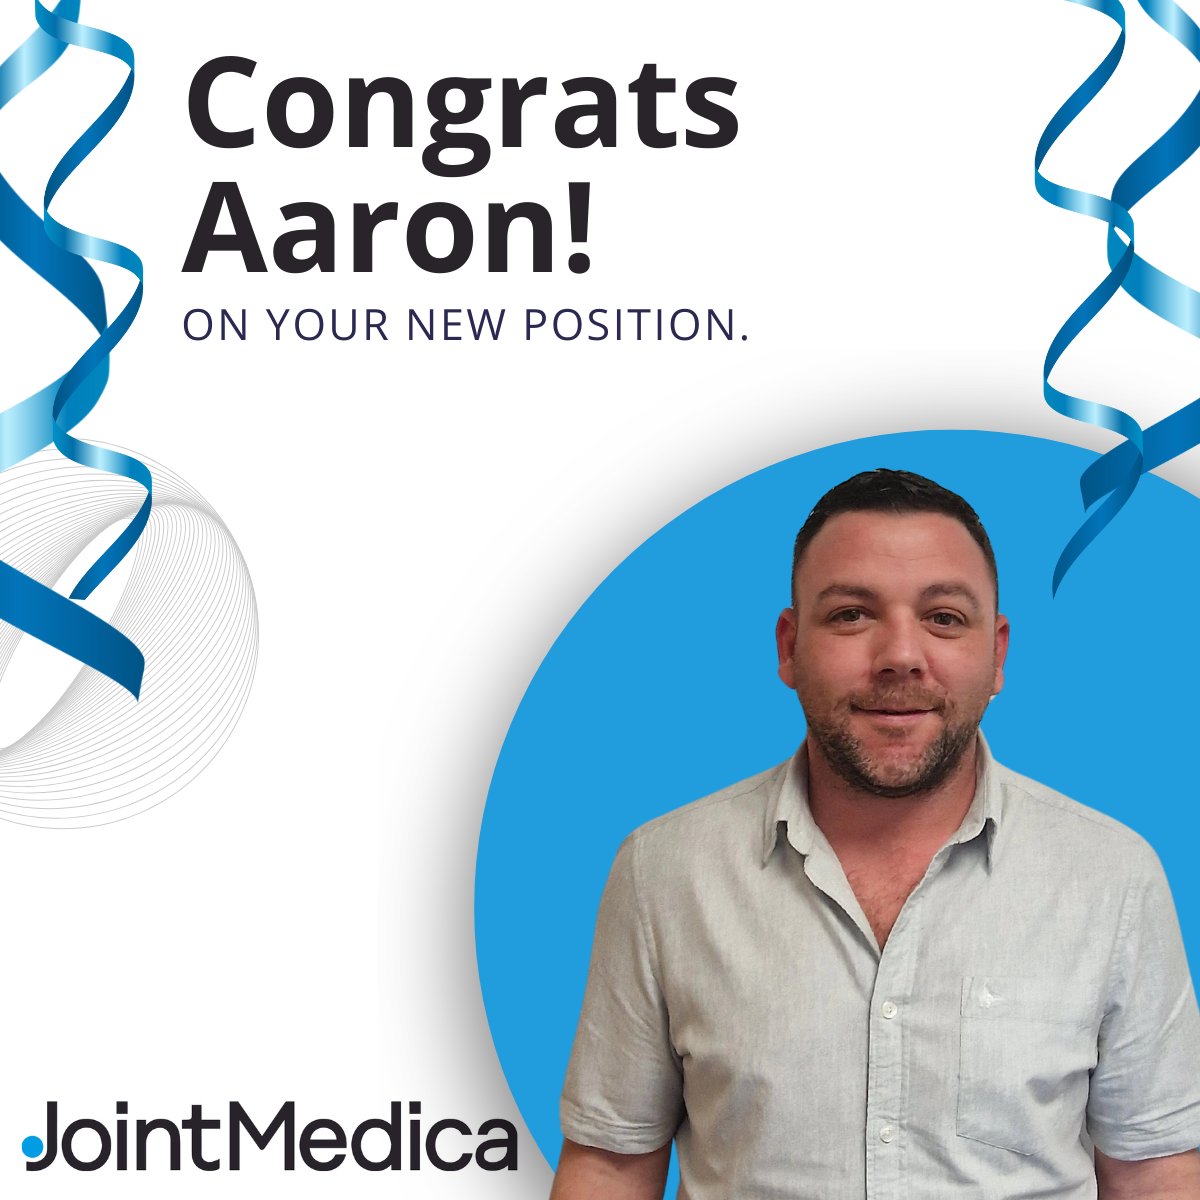 We are thrilled to announce the well-deserved promotion of Aaron Greenfield to the position of Supply Chain Supervisor! Since joining the team in July 2022, Aaron has consistently proven himself to be an invaluable member of the team. As our new Supply Chain Supervisor, Aaron